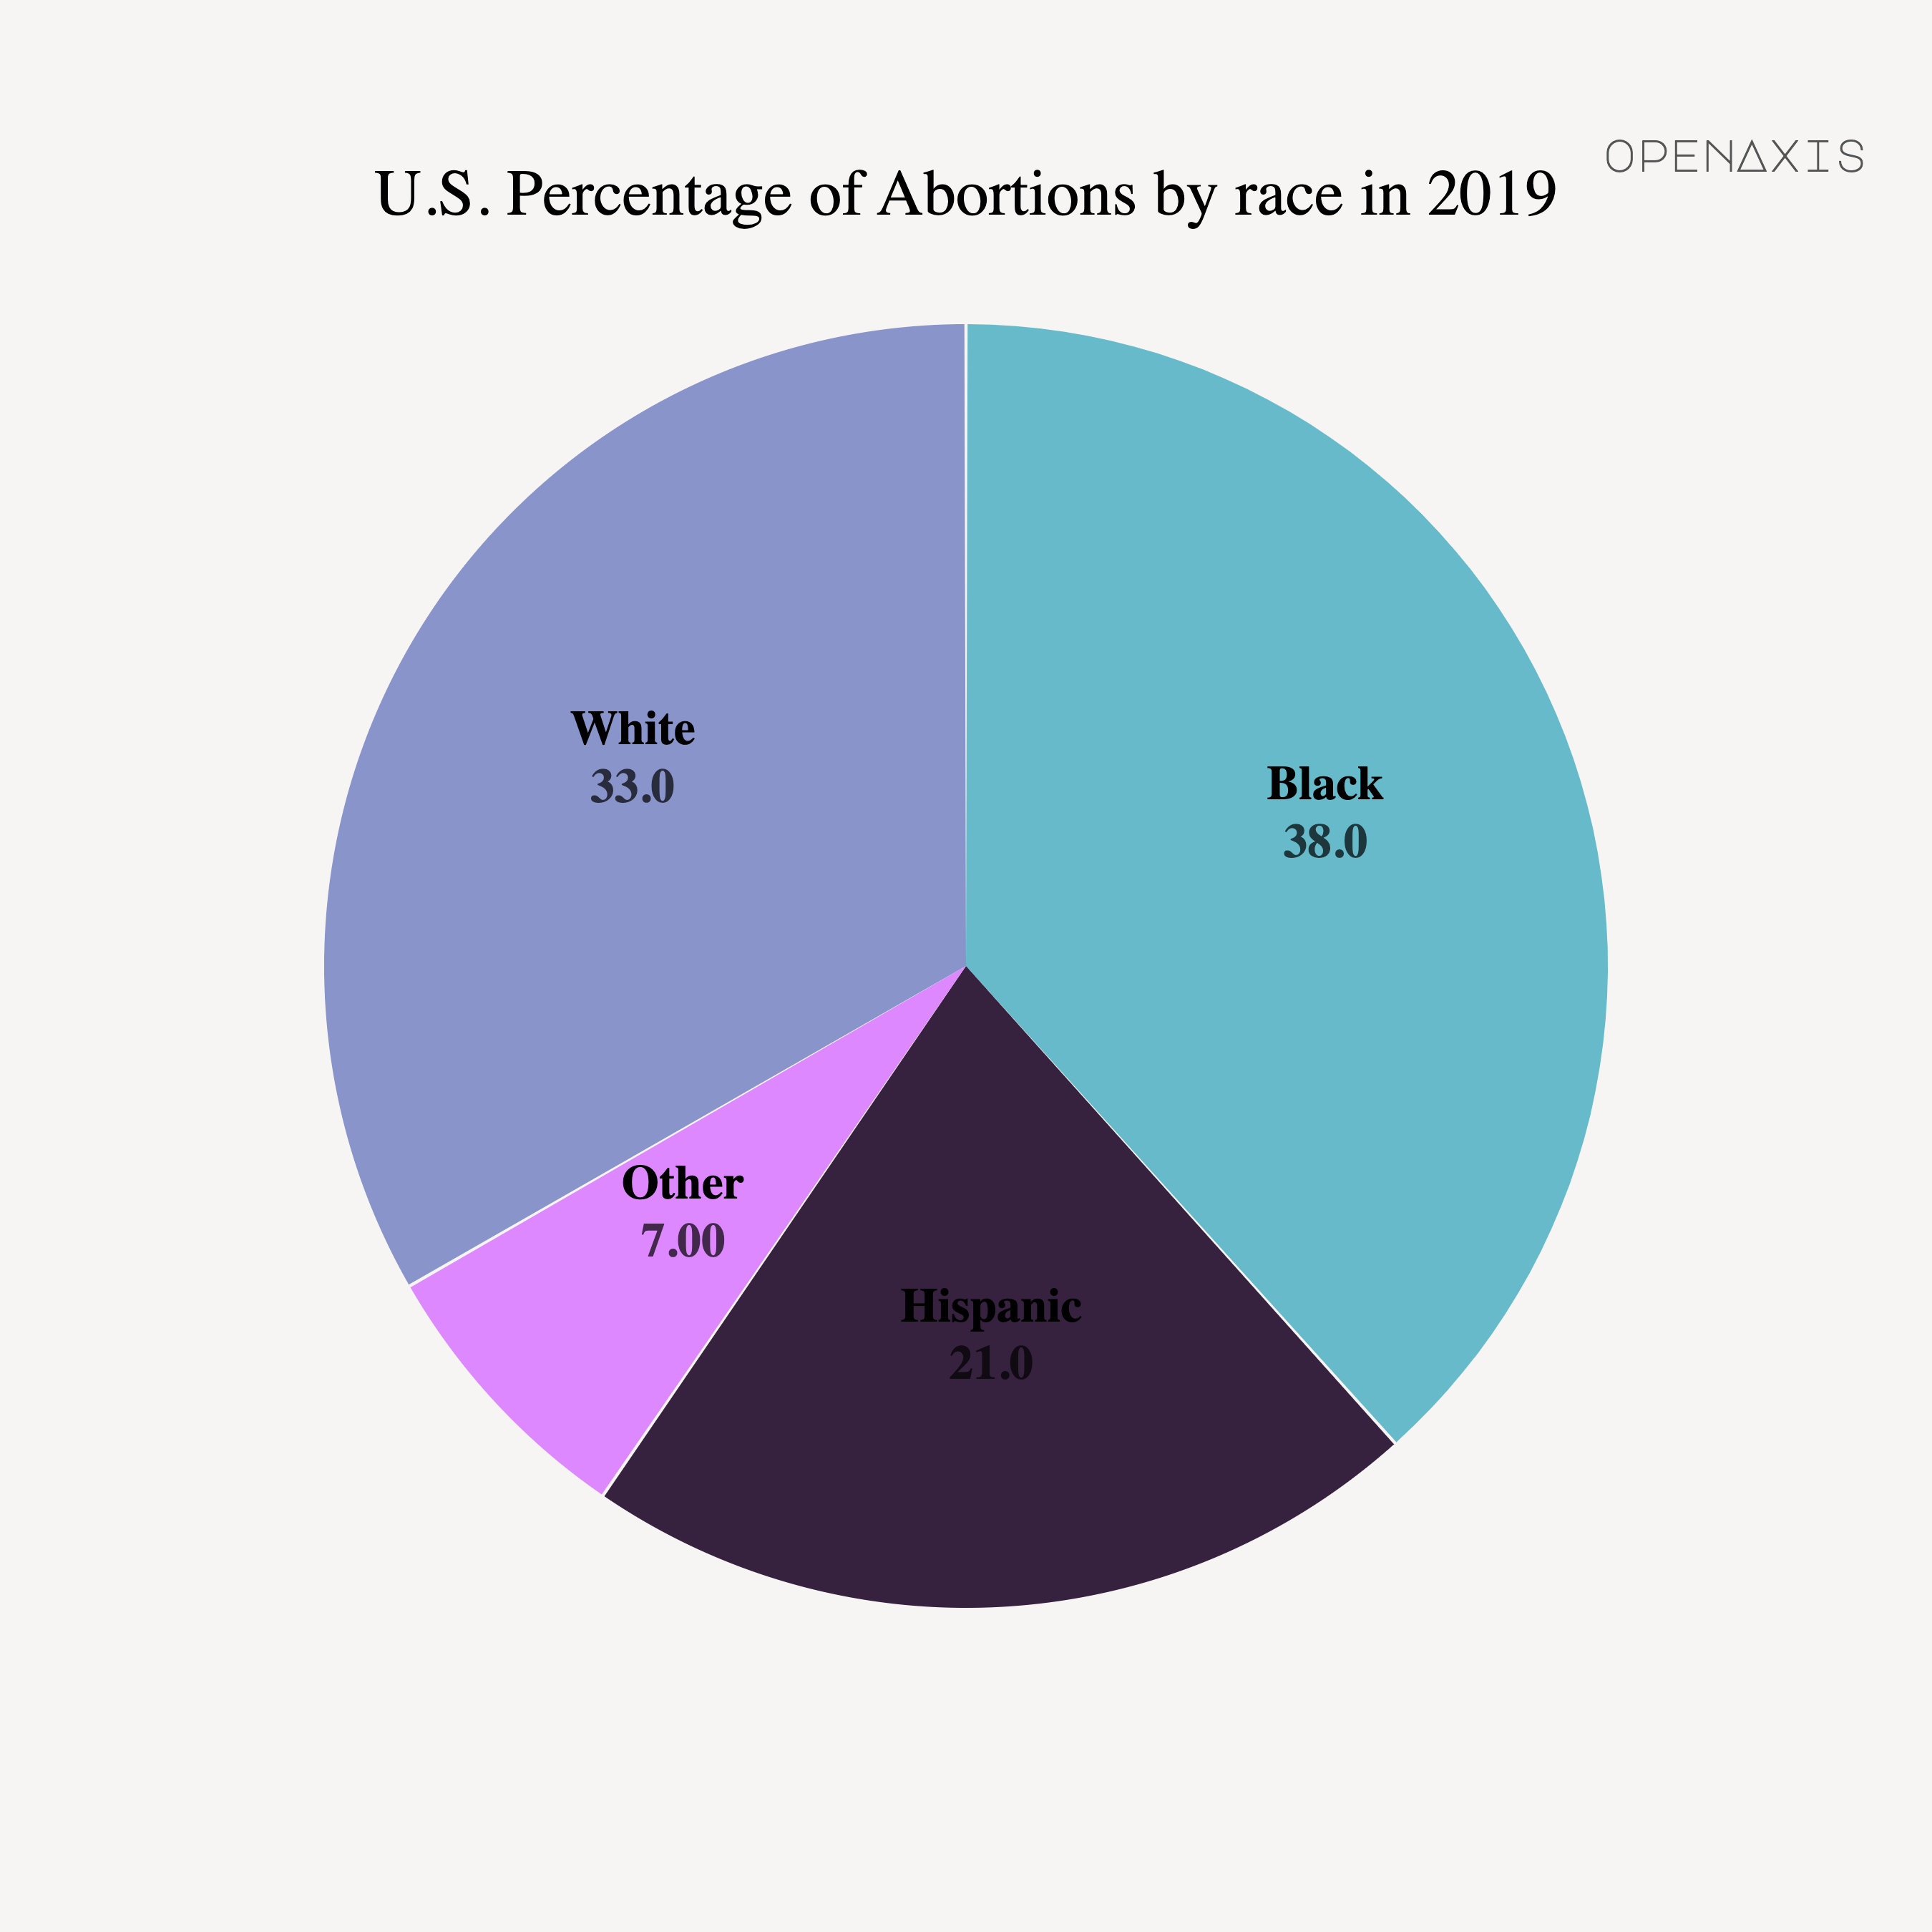 "U.S. Percentage of Abortions by race in 2019"